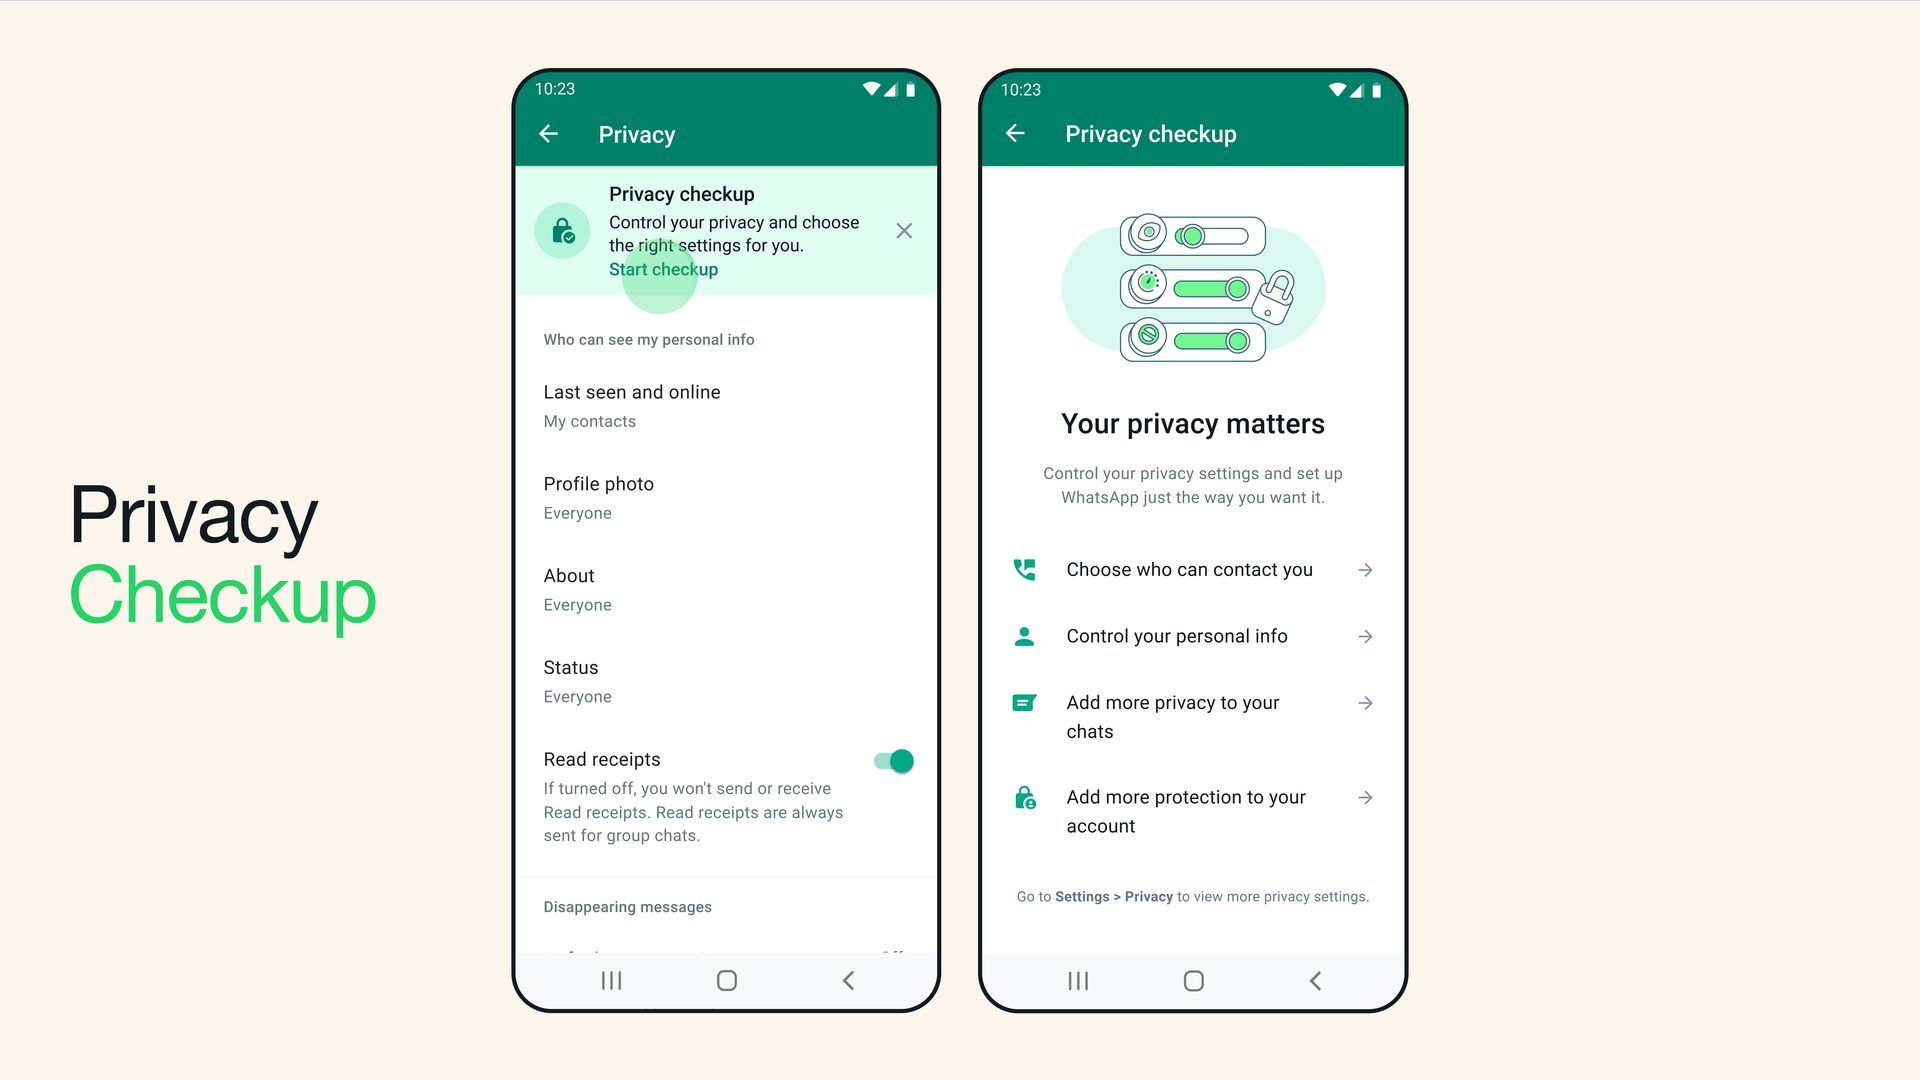 With this article, you can learn how to use WhatsApp Silence Unknown Callers feature and Privacy Checkup option. Keep reading and explore!